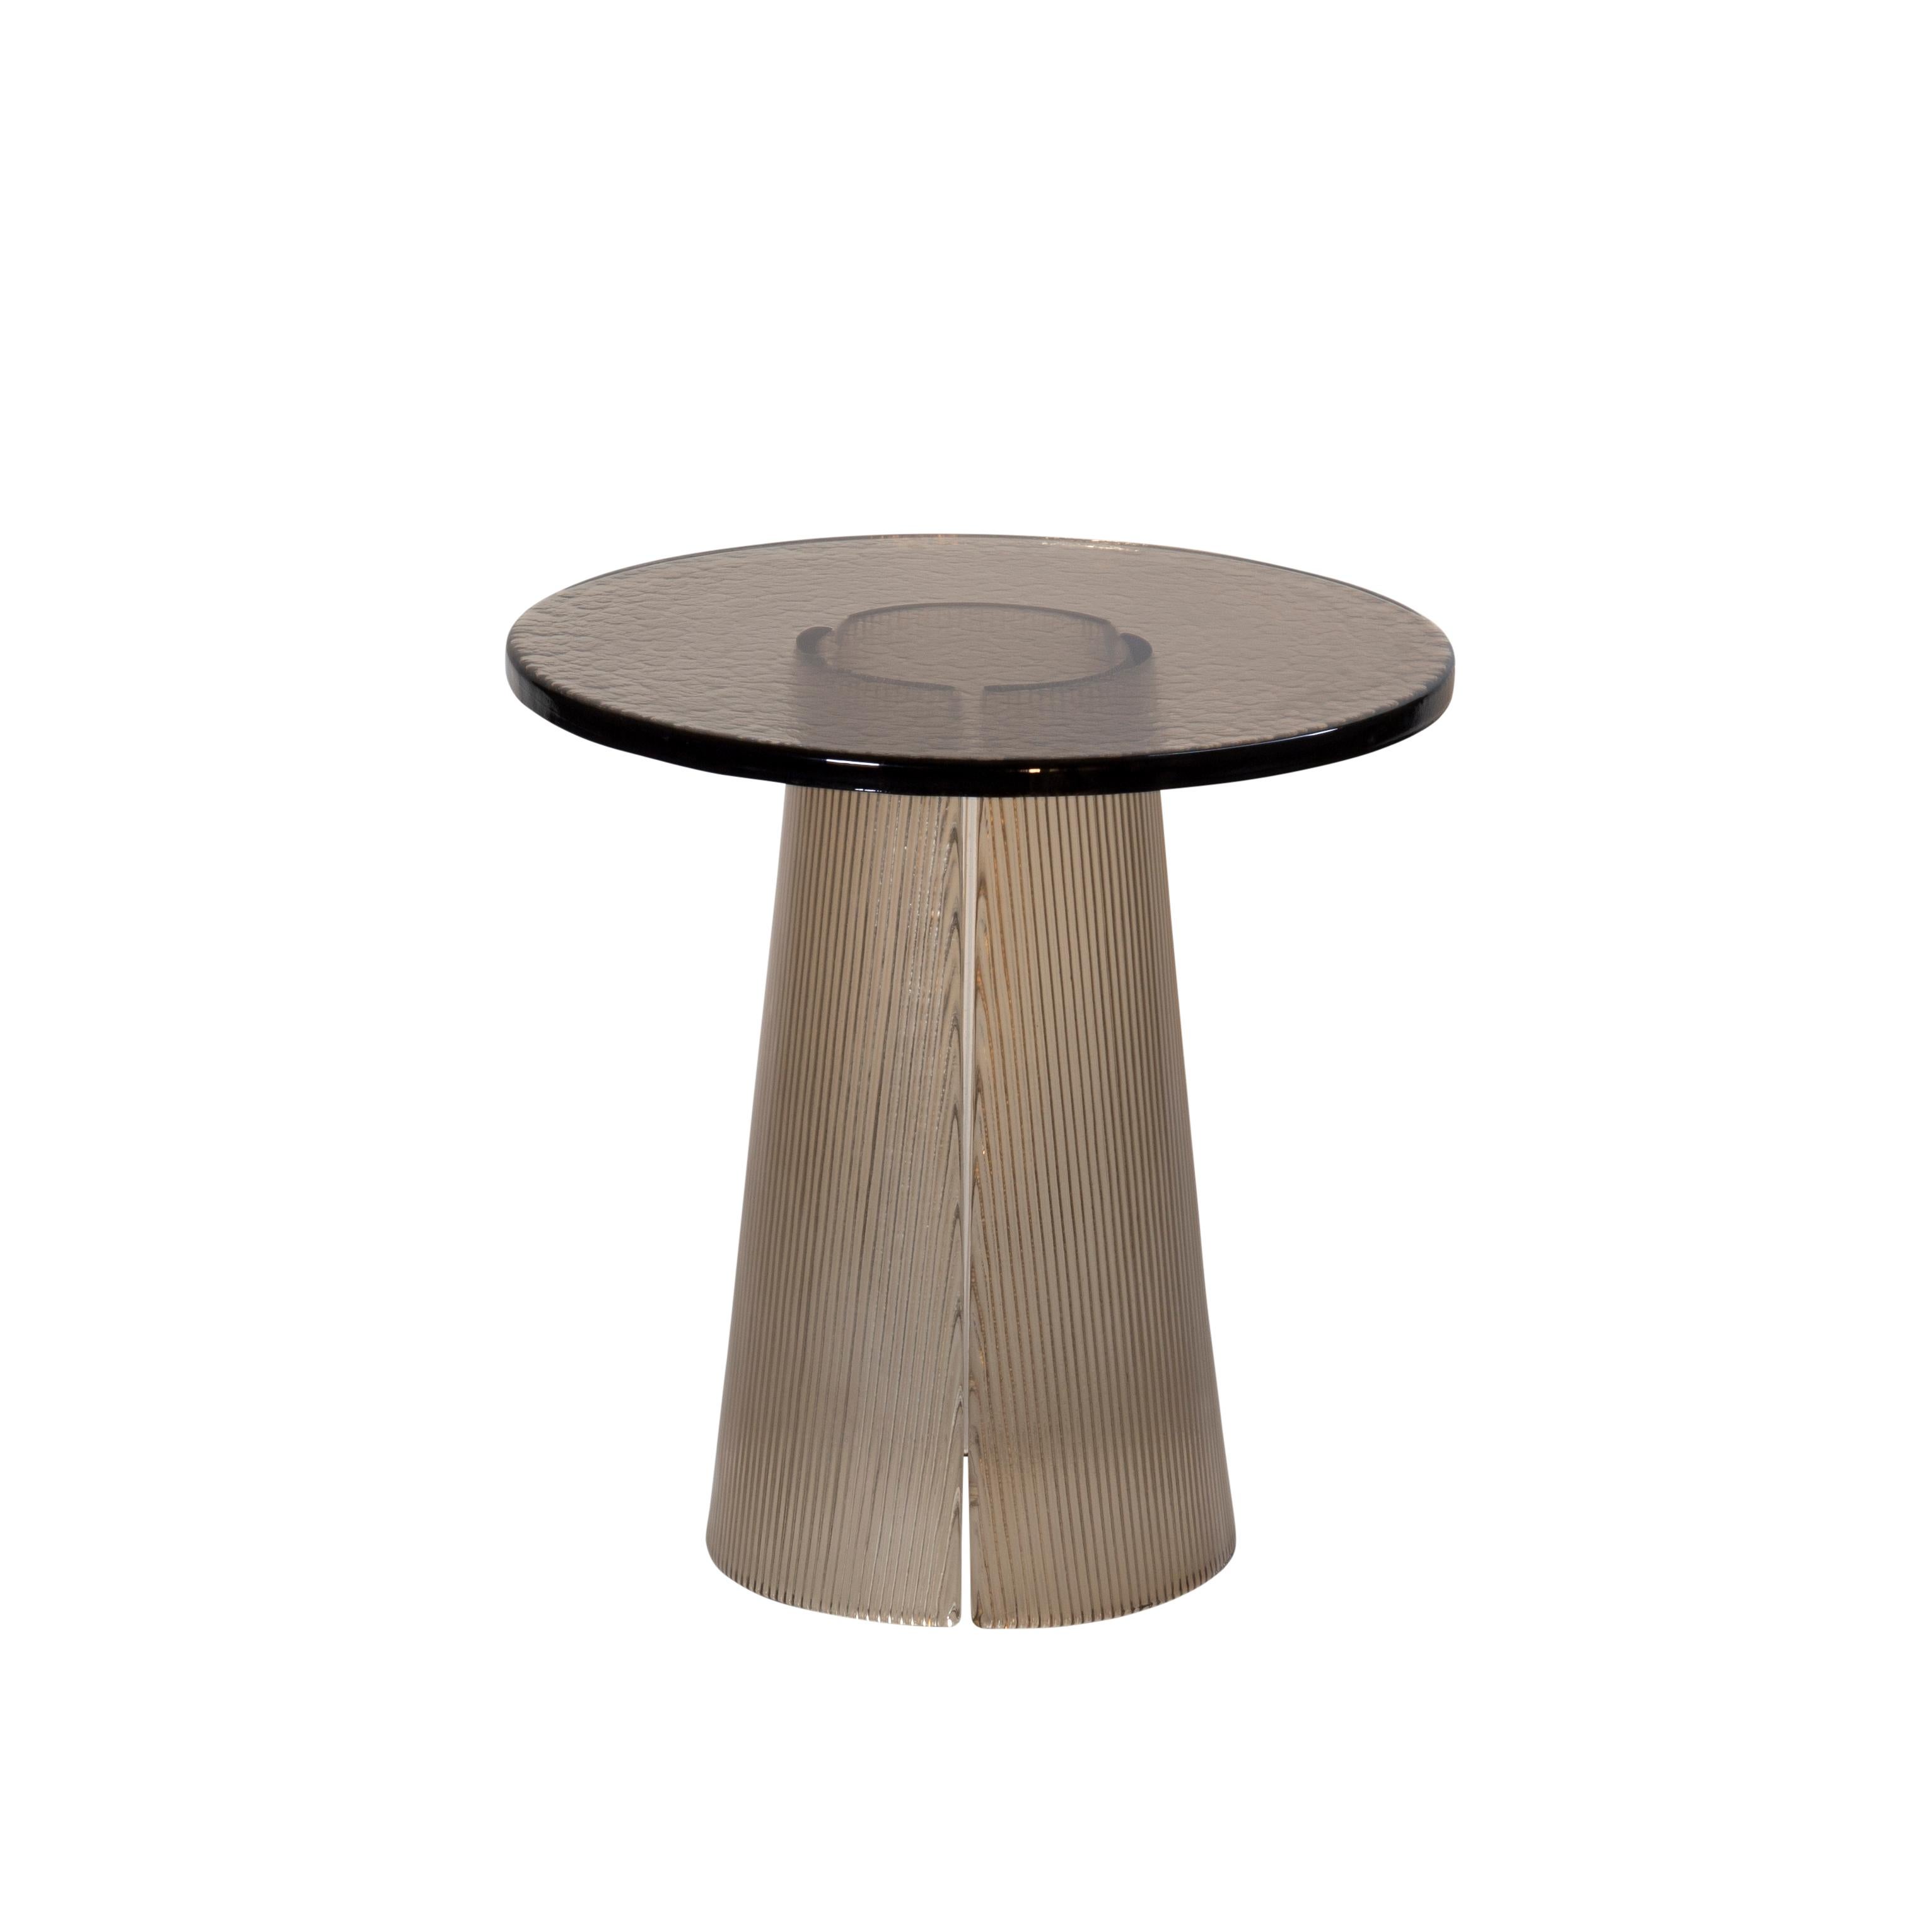 Bent side table high smoky grey by Pulpo
Dimensions: D50 x H51.5 cm.
Materials: casted glass.

Also available in different finishes and dimensions. 

The bubbled surface of the cast glass table top dances against with the smooth lines of the